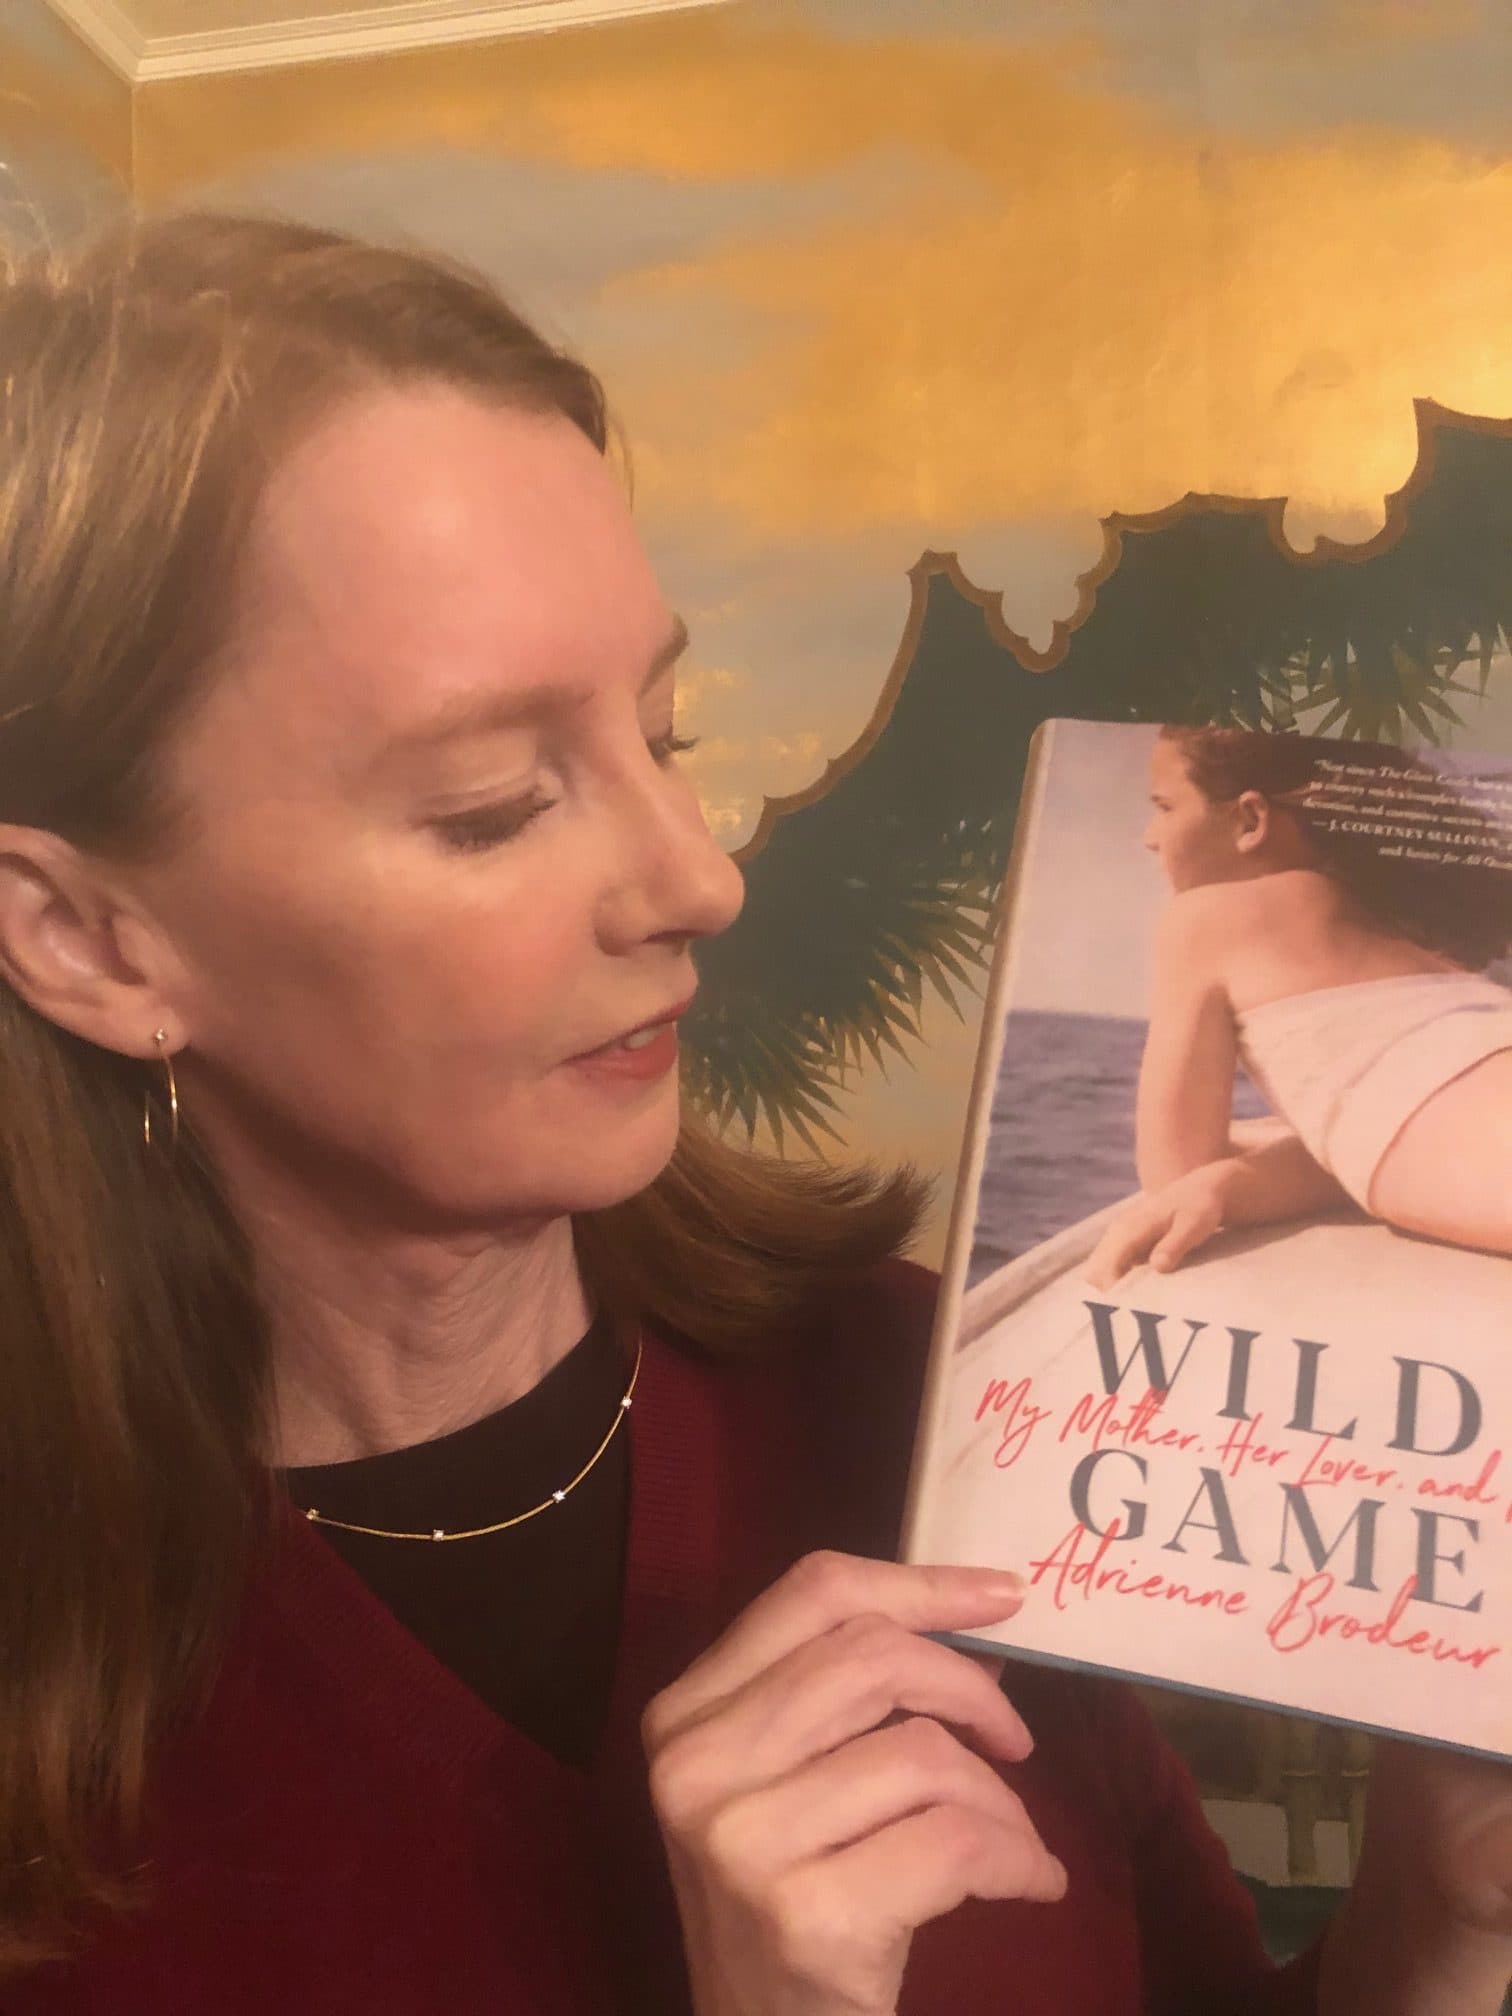 Gretchen holding the book Wild Game by Adrienne Brodeur